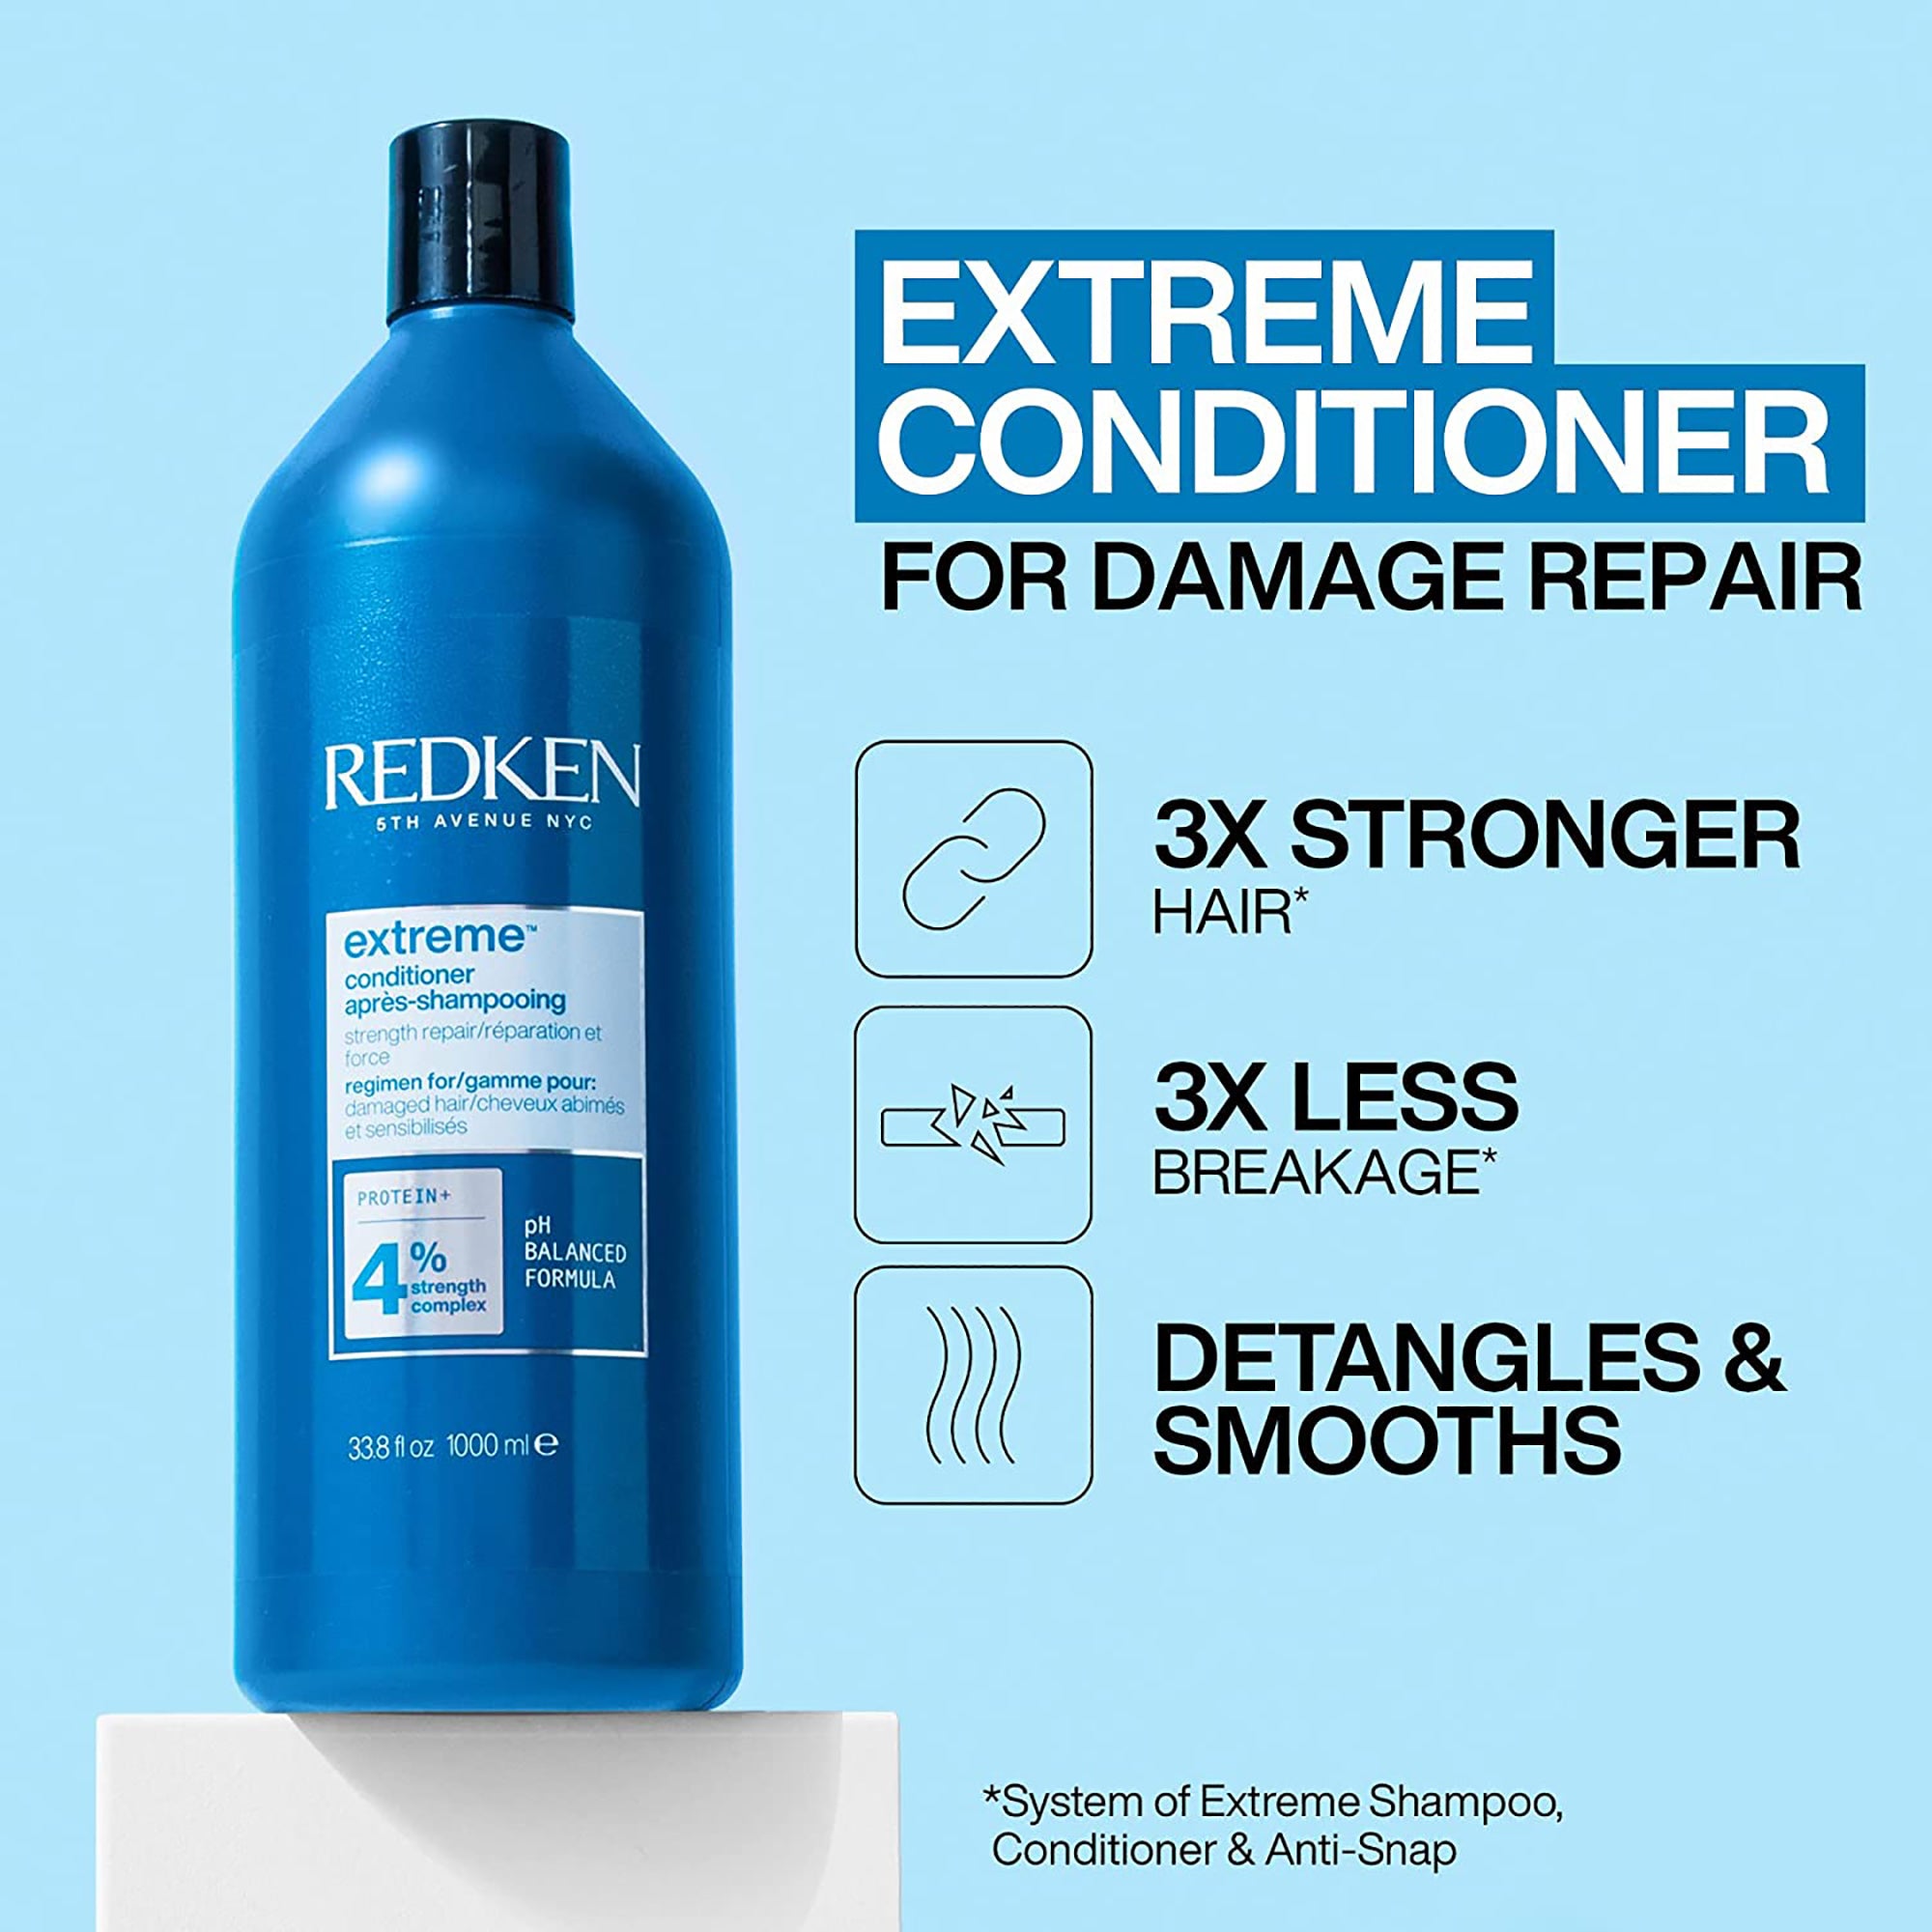 Redken Extreme Shampoo and Conditioner Liter Duo ($104 Value) / DUO